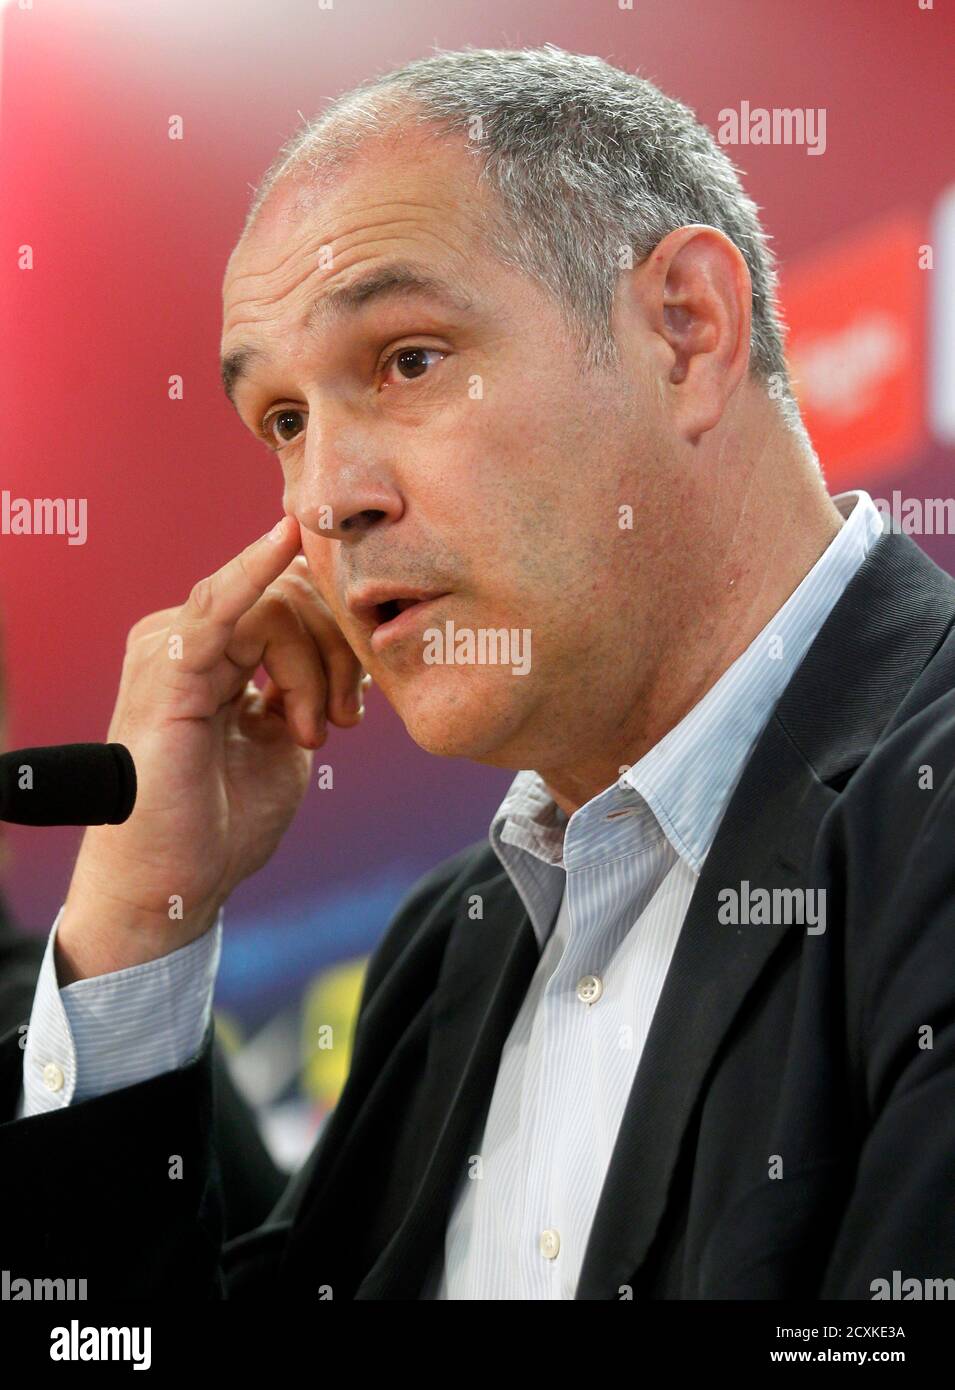 Barcelona's Sports Director Andoni Zubizarreta attends a news conference after the first training session of the season at Joan Gamper training camp, near Barcelona July 17, 2012. REUTERS/Albert Gea (SPAIN - Tags: SPORT SOCCER HEADSHOT) Stock Photo